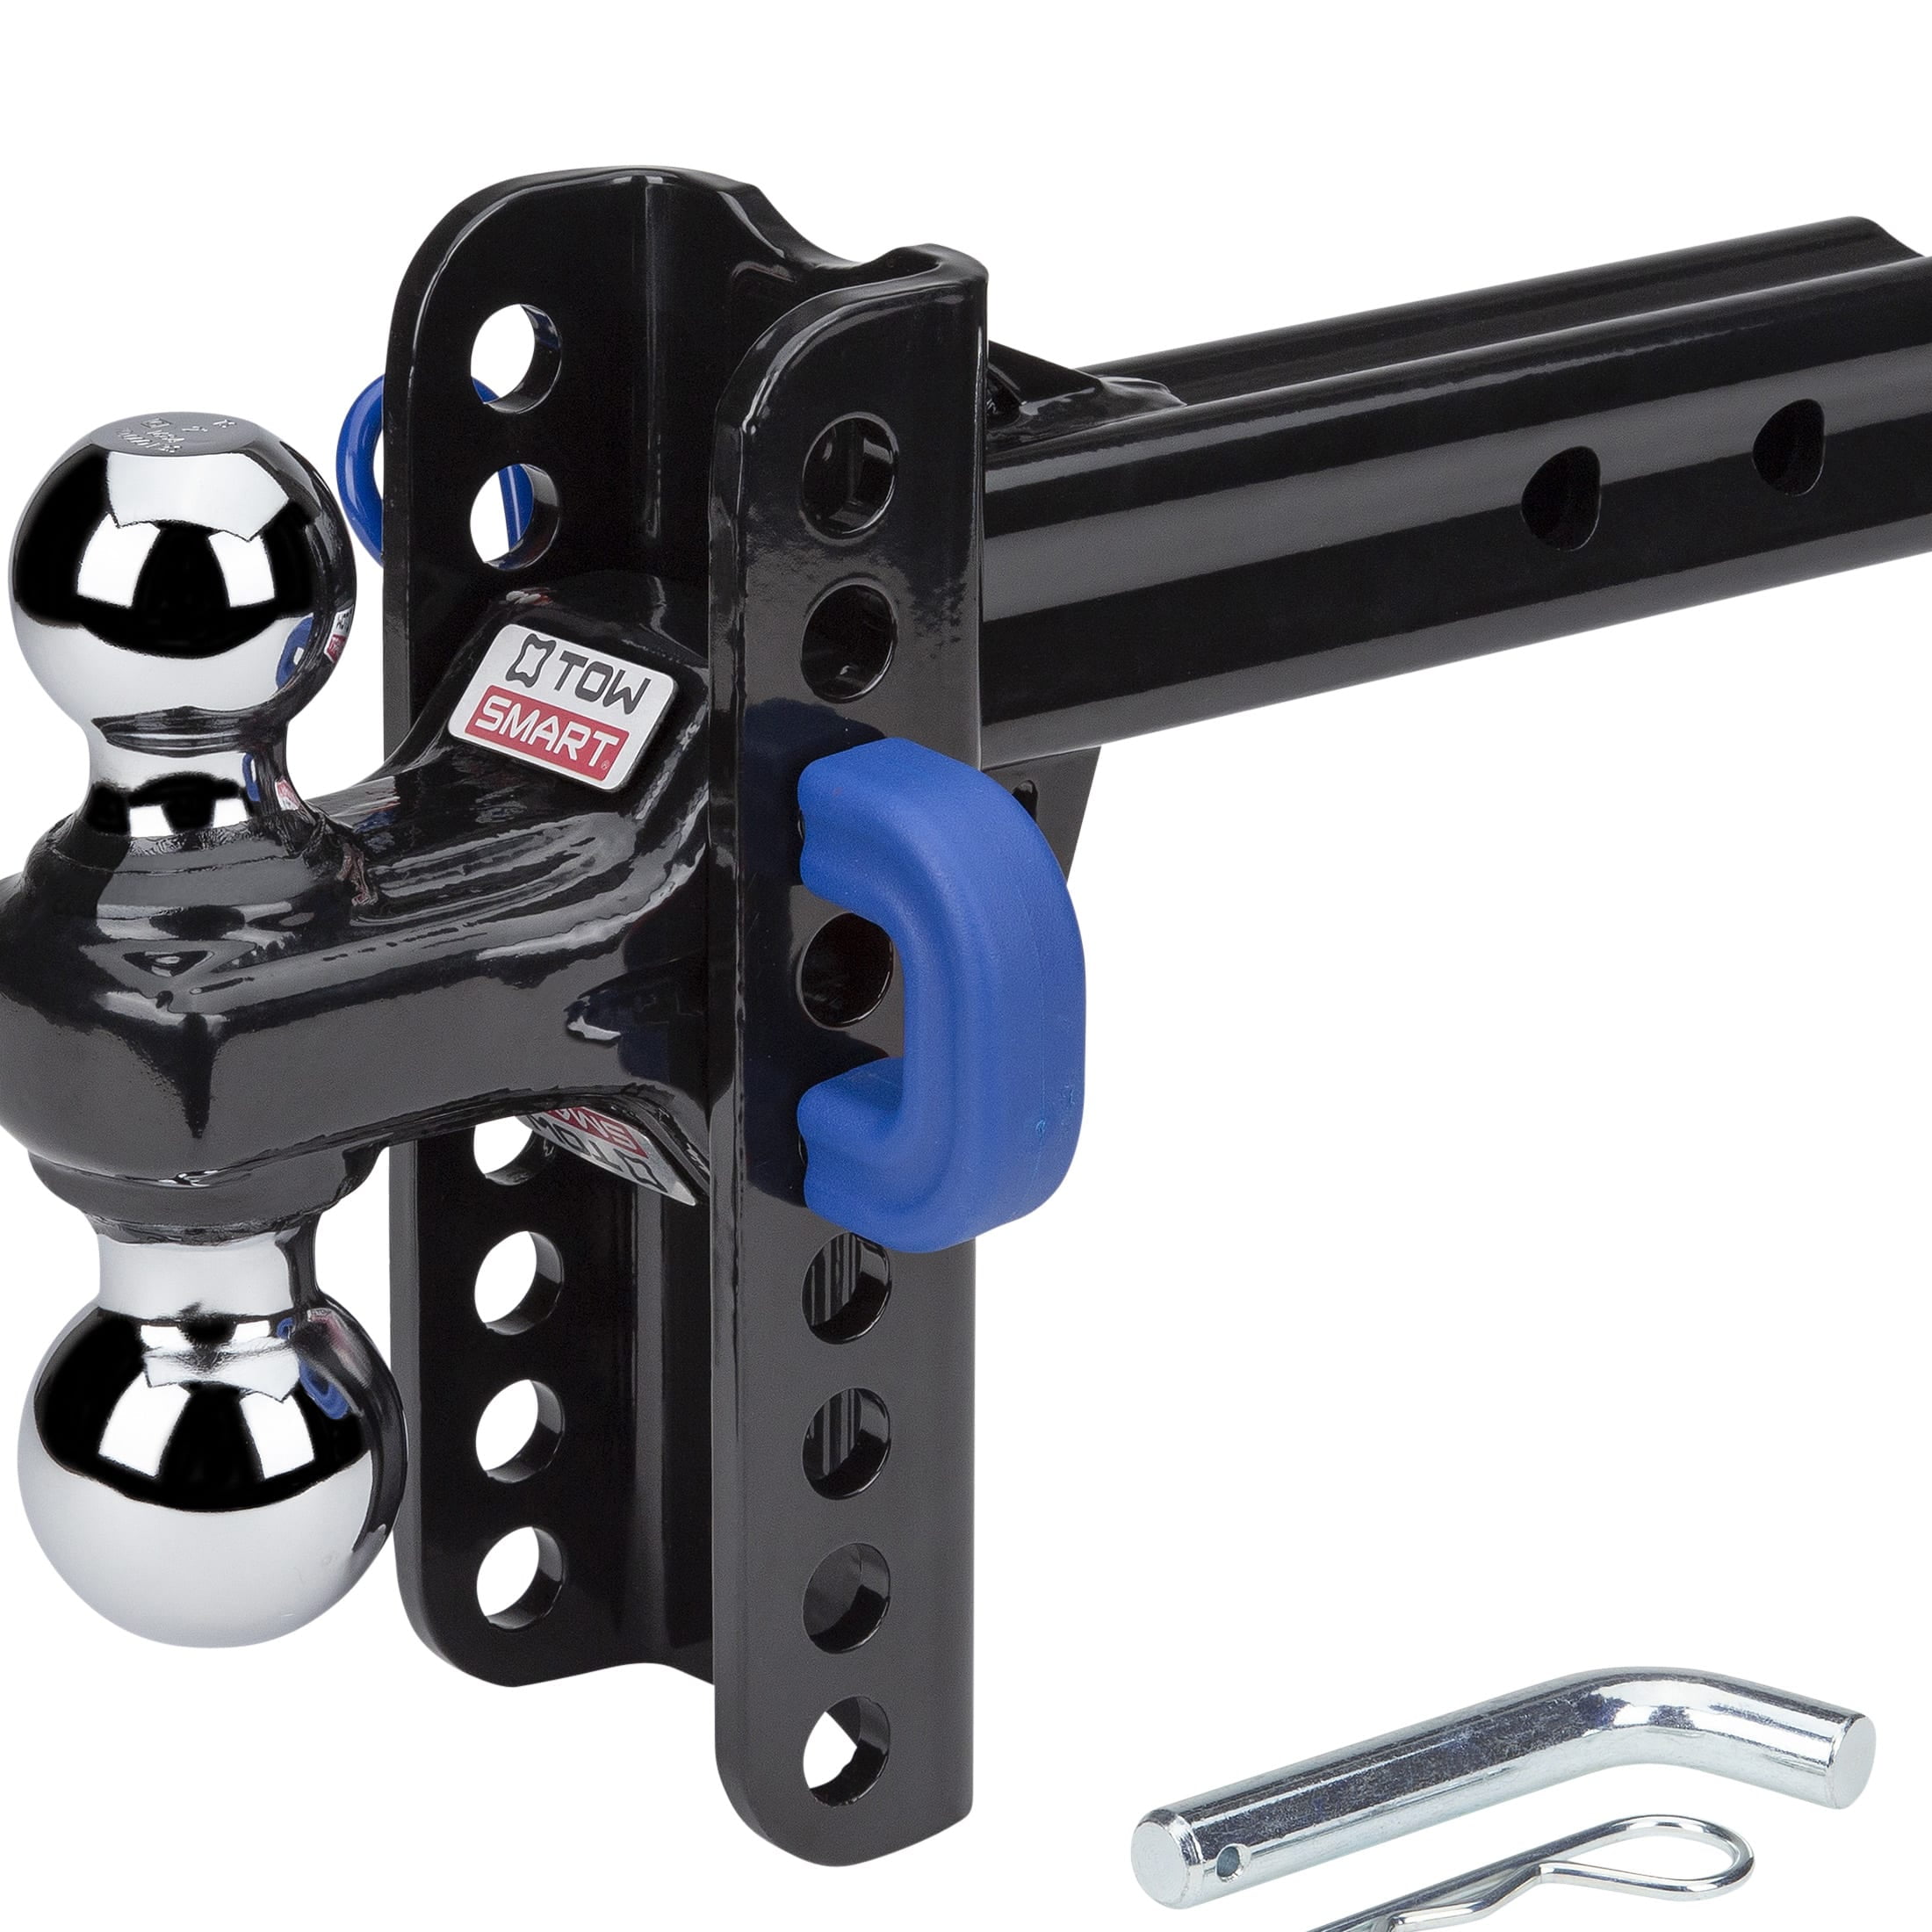 TowSmart Hitch Towing Dual Ball X-Mount  Class V  5.5in Drop  2in Receiver  9206  14000lb  1 Each $120